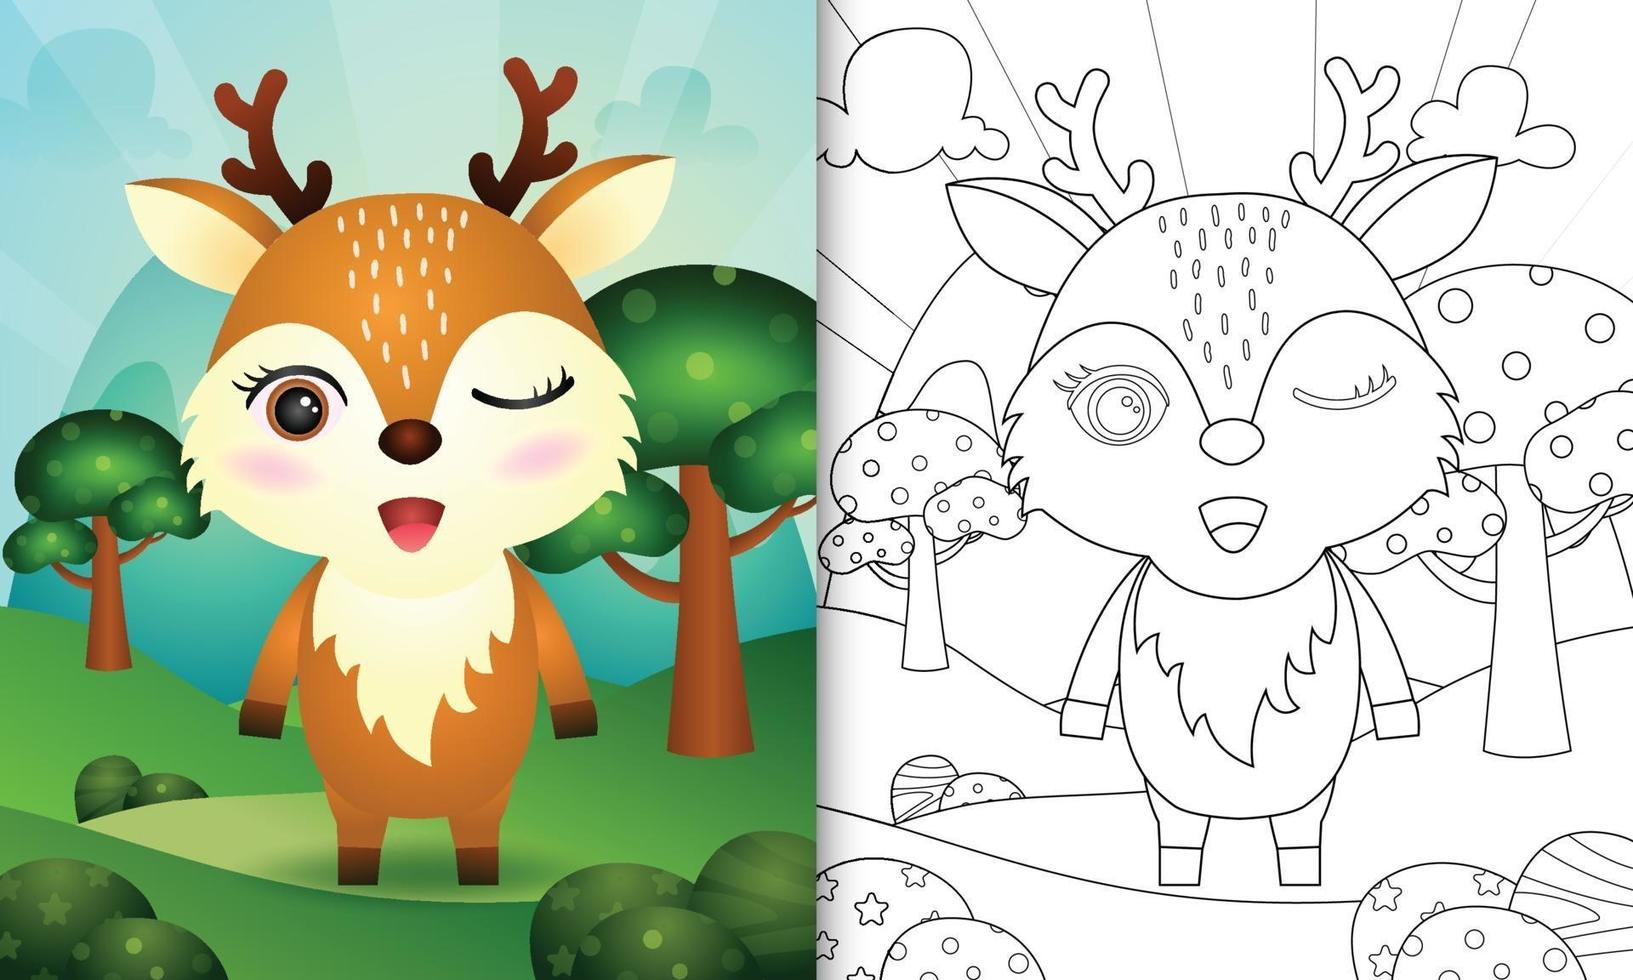 Coloring book for kids with a cute deer character illustration vector